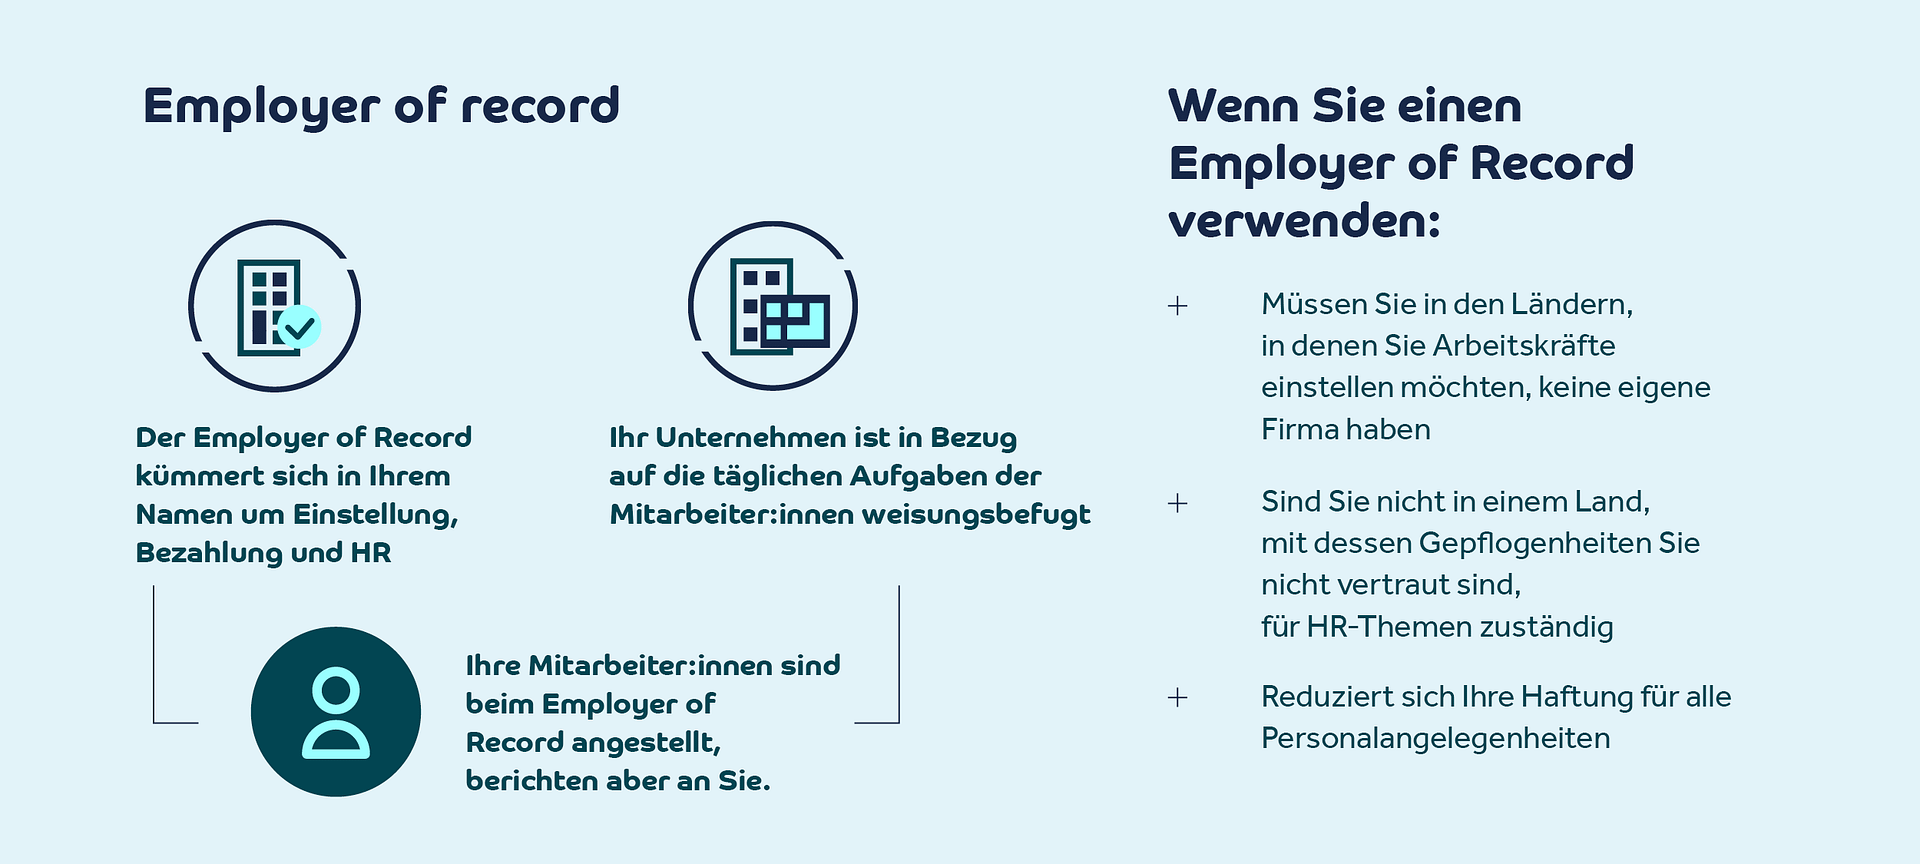 Employer of Record